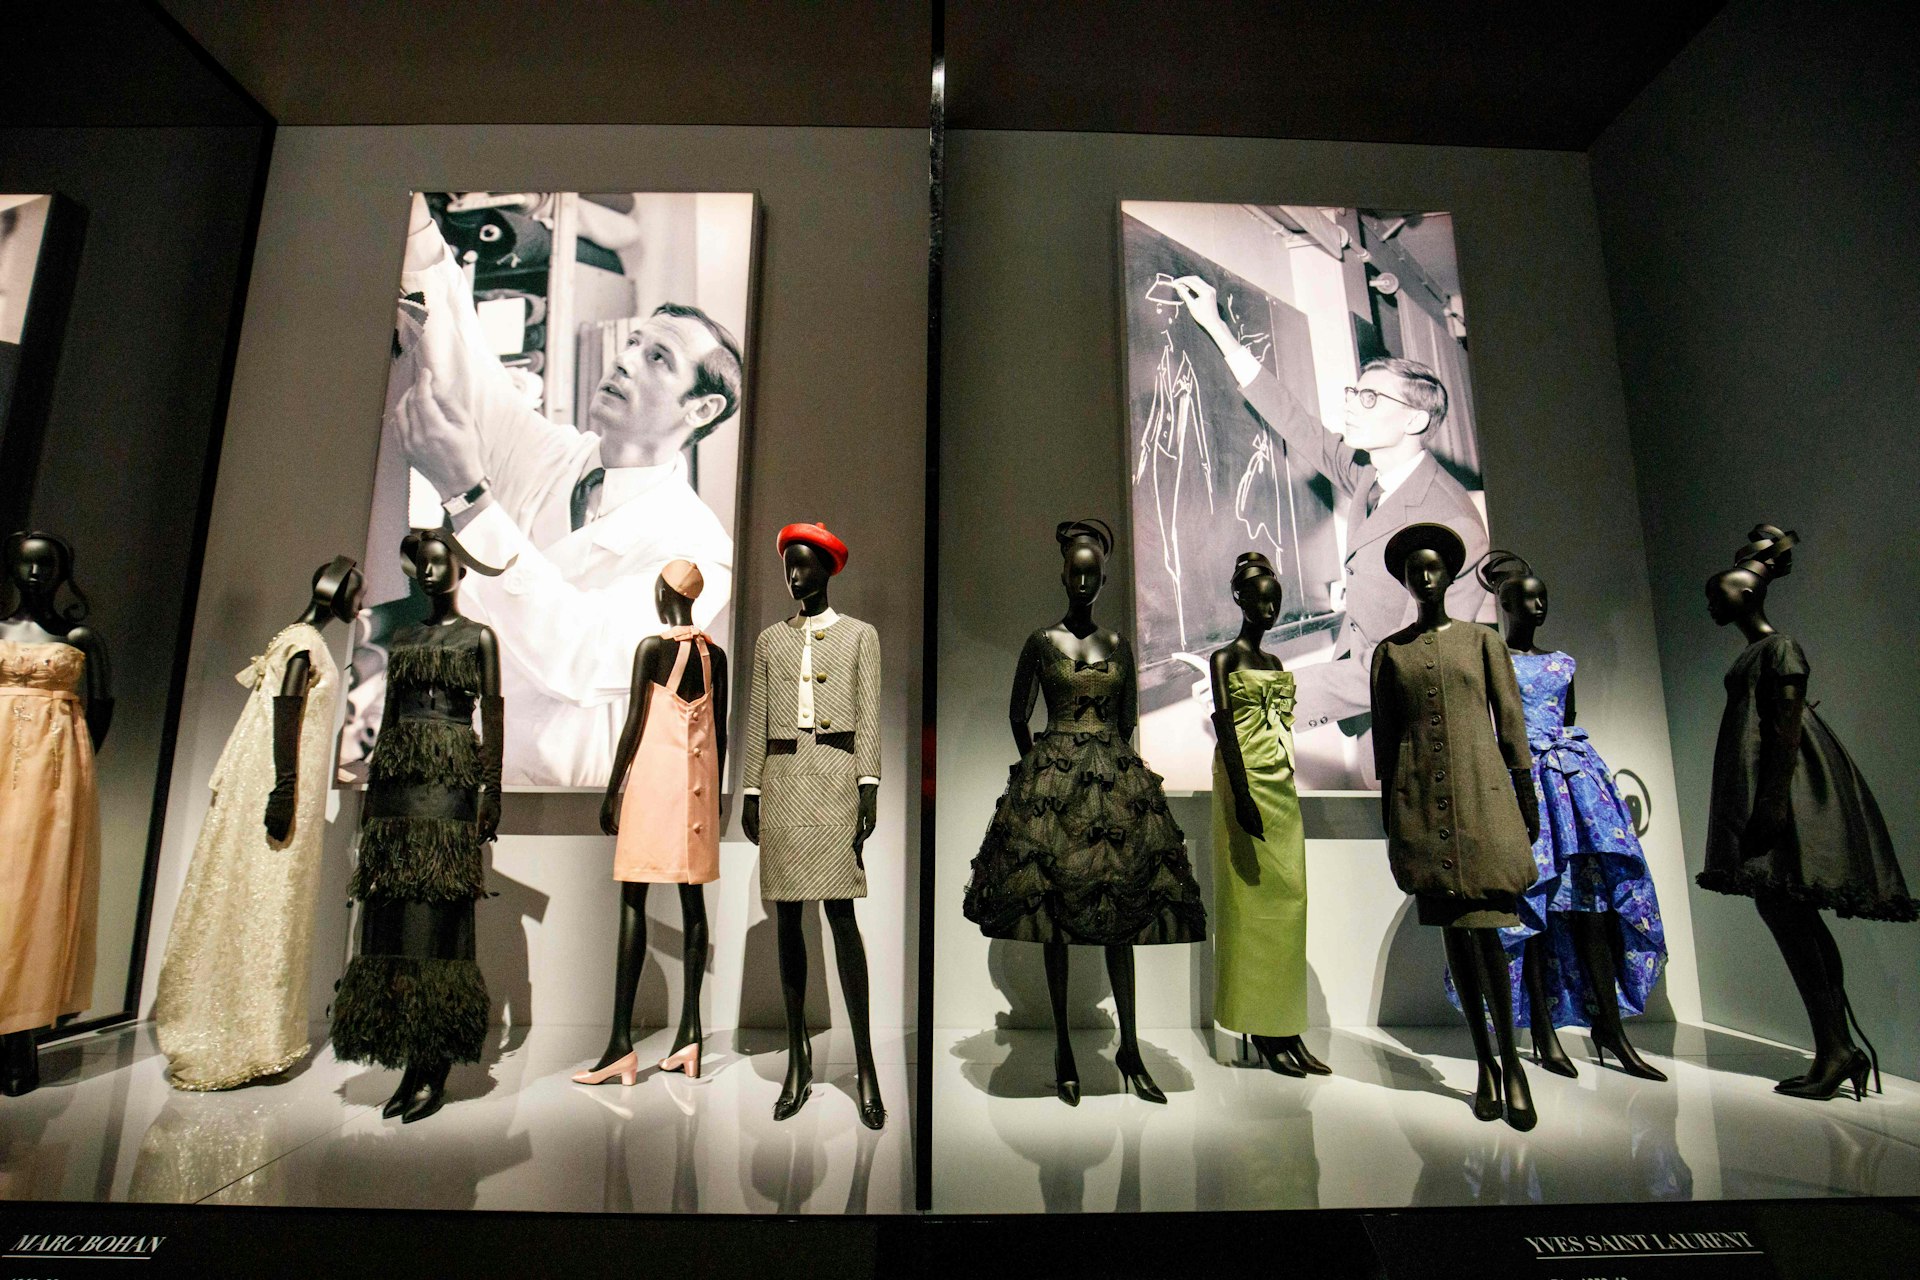 Costumes by Dior designers Marc Bohan and Yves Saint Laurent at the 2019 exhibition at “Christian Dior: Designer of Dreams,” V&A Museum, London, England, United Kingdom